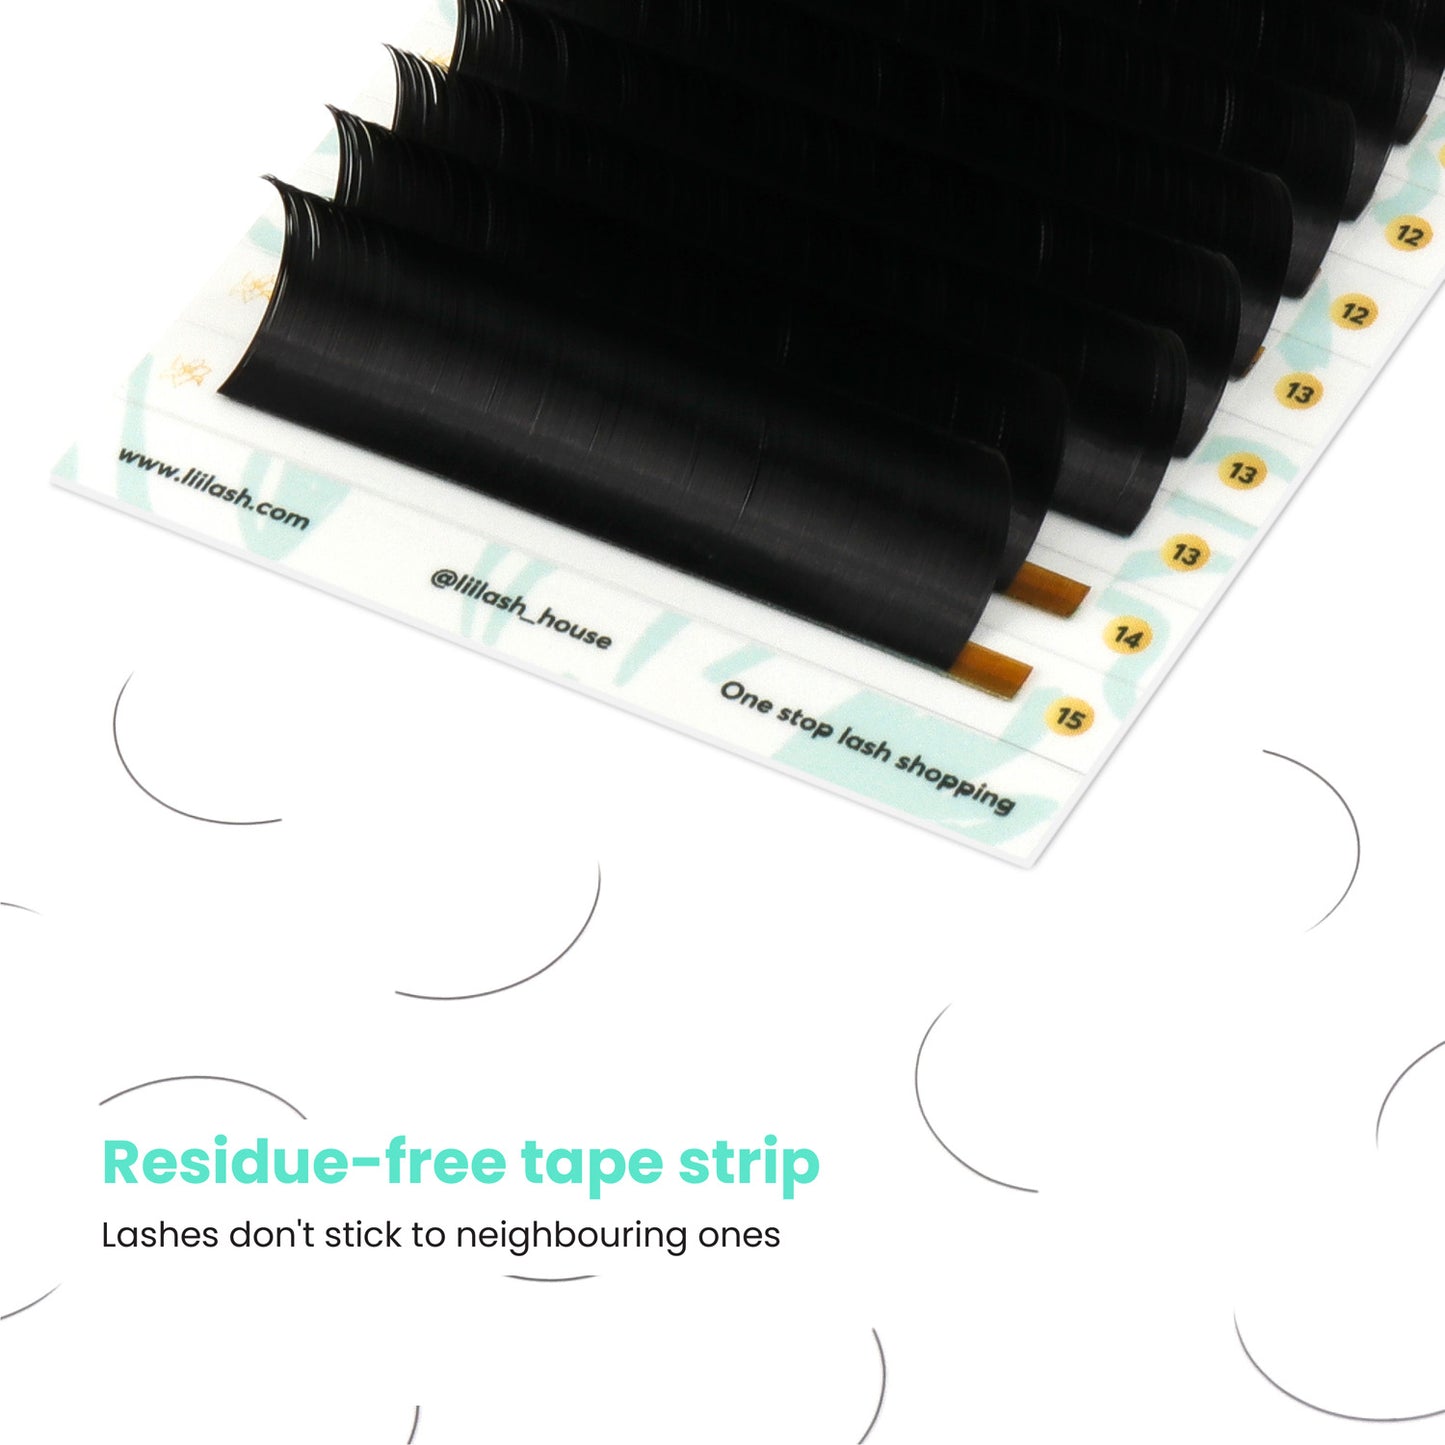 Close-up of three Super Mink classic lash strips, highlighting the beautiful texture of the Super Mink lash strips.